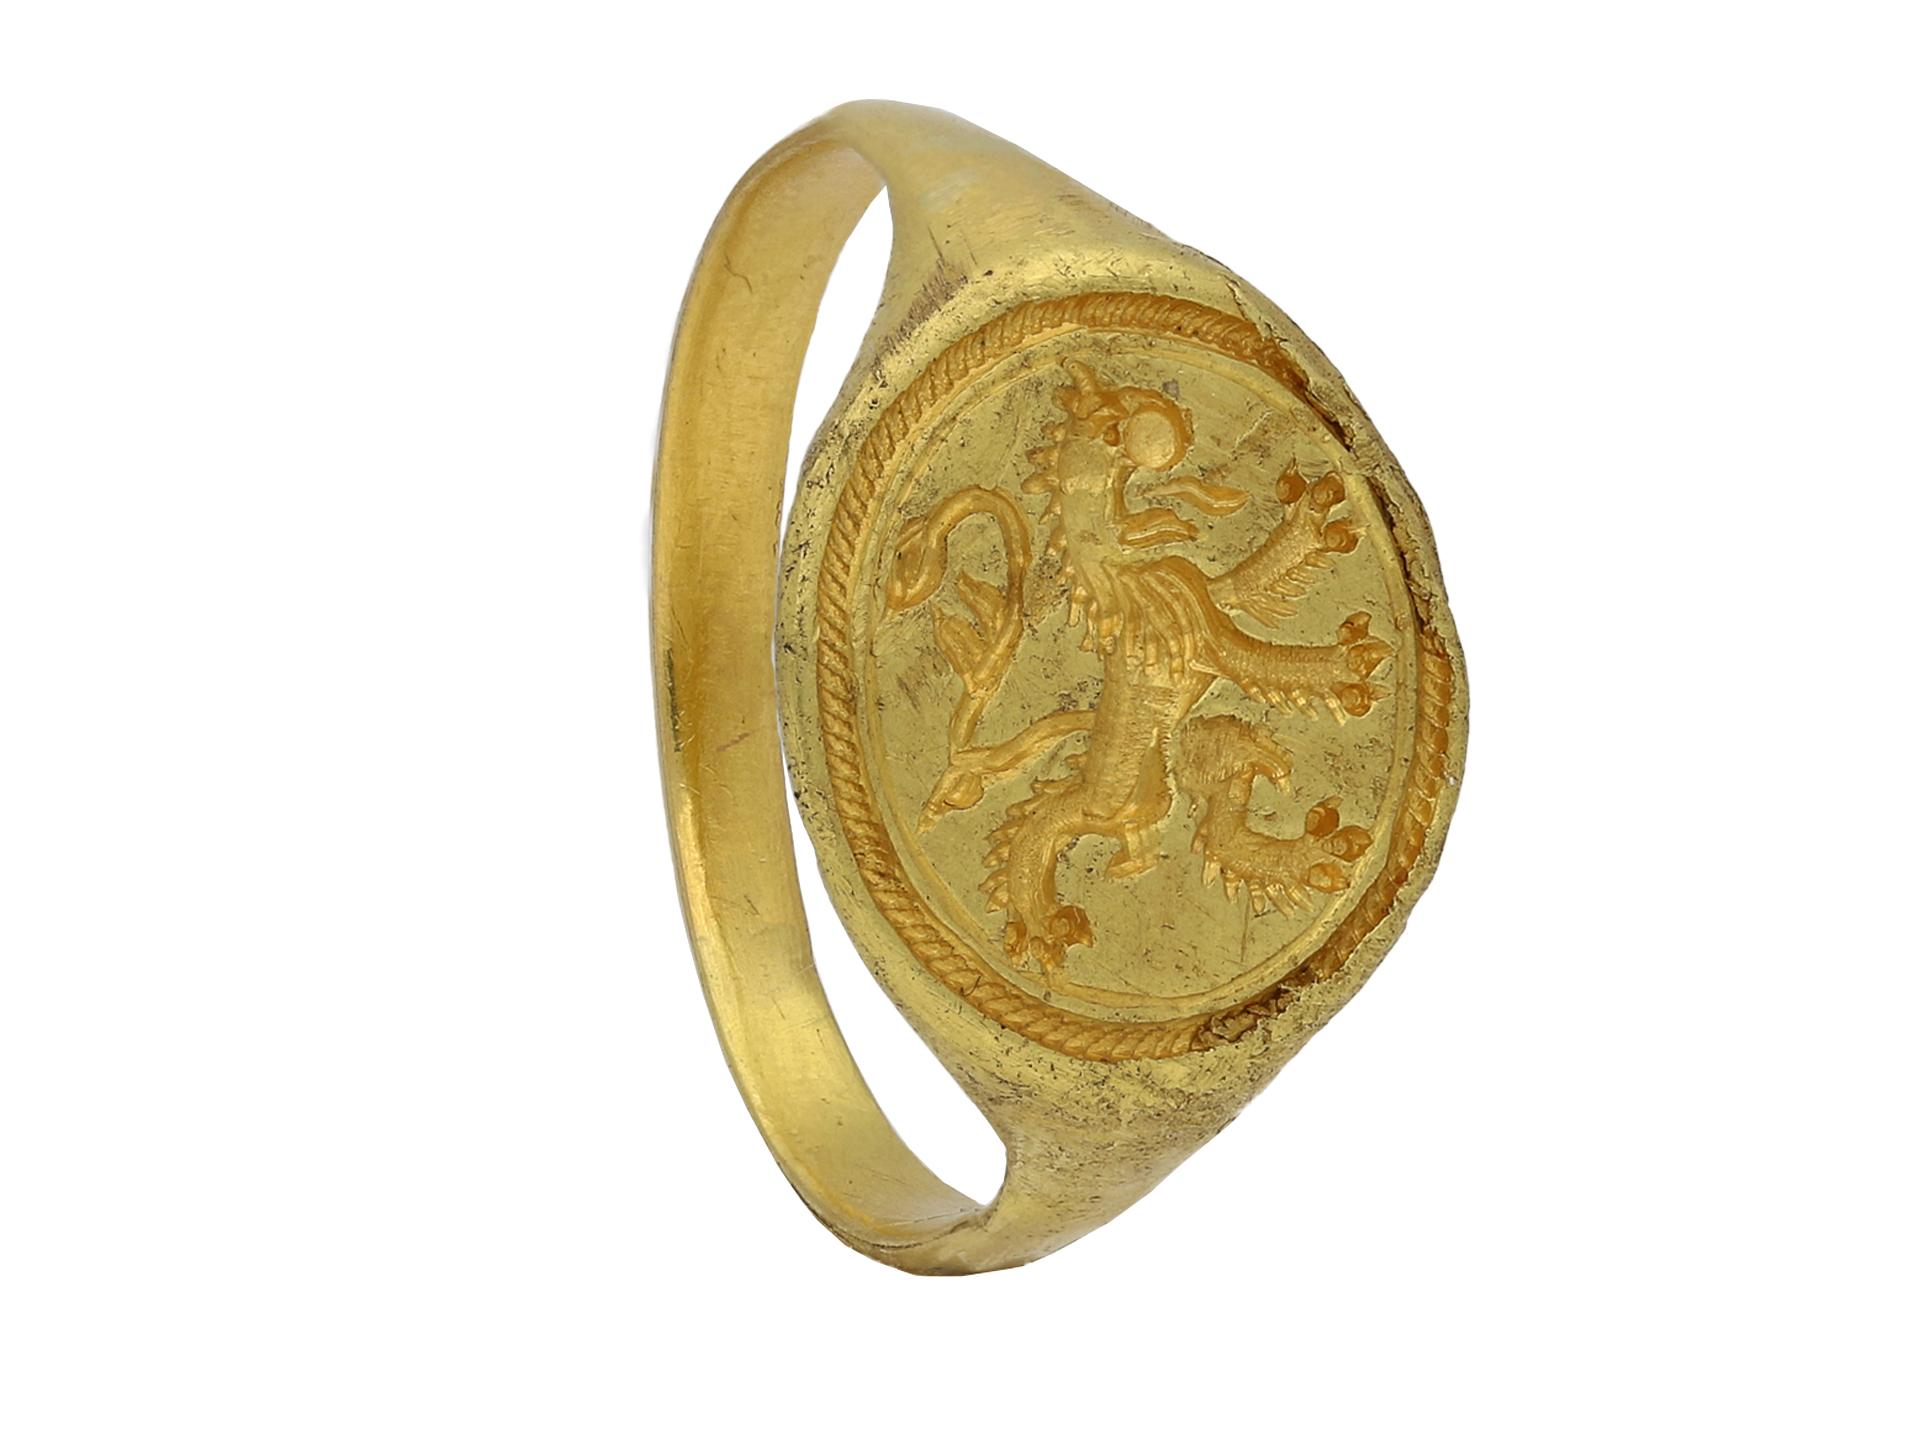 Elizabethan gold signet ring with Scottish rampant lion. A solid gold signet ring comprising of a central flat discoid bezel with a ropework border, featuring a rampant heraldic lion facing to the left with jaws open and tongue extended, flanked by